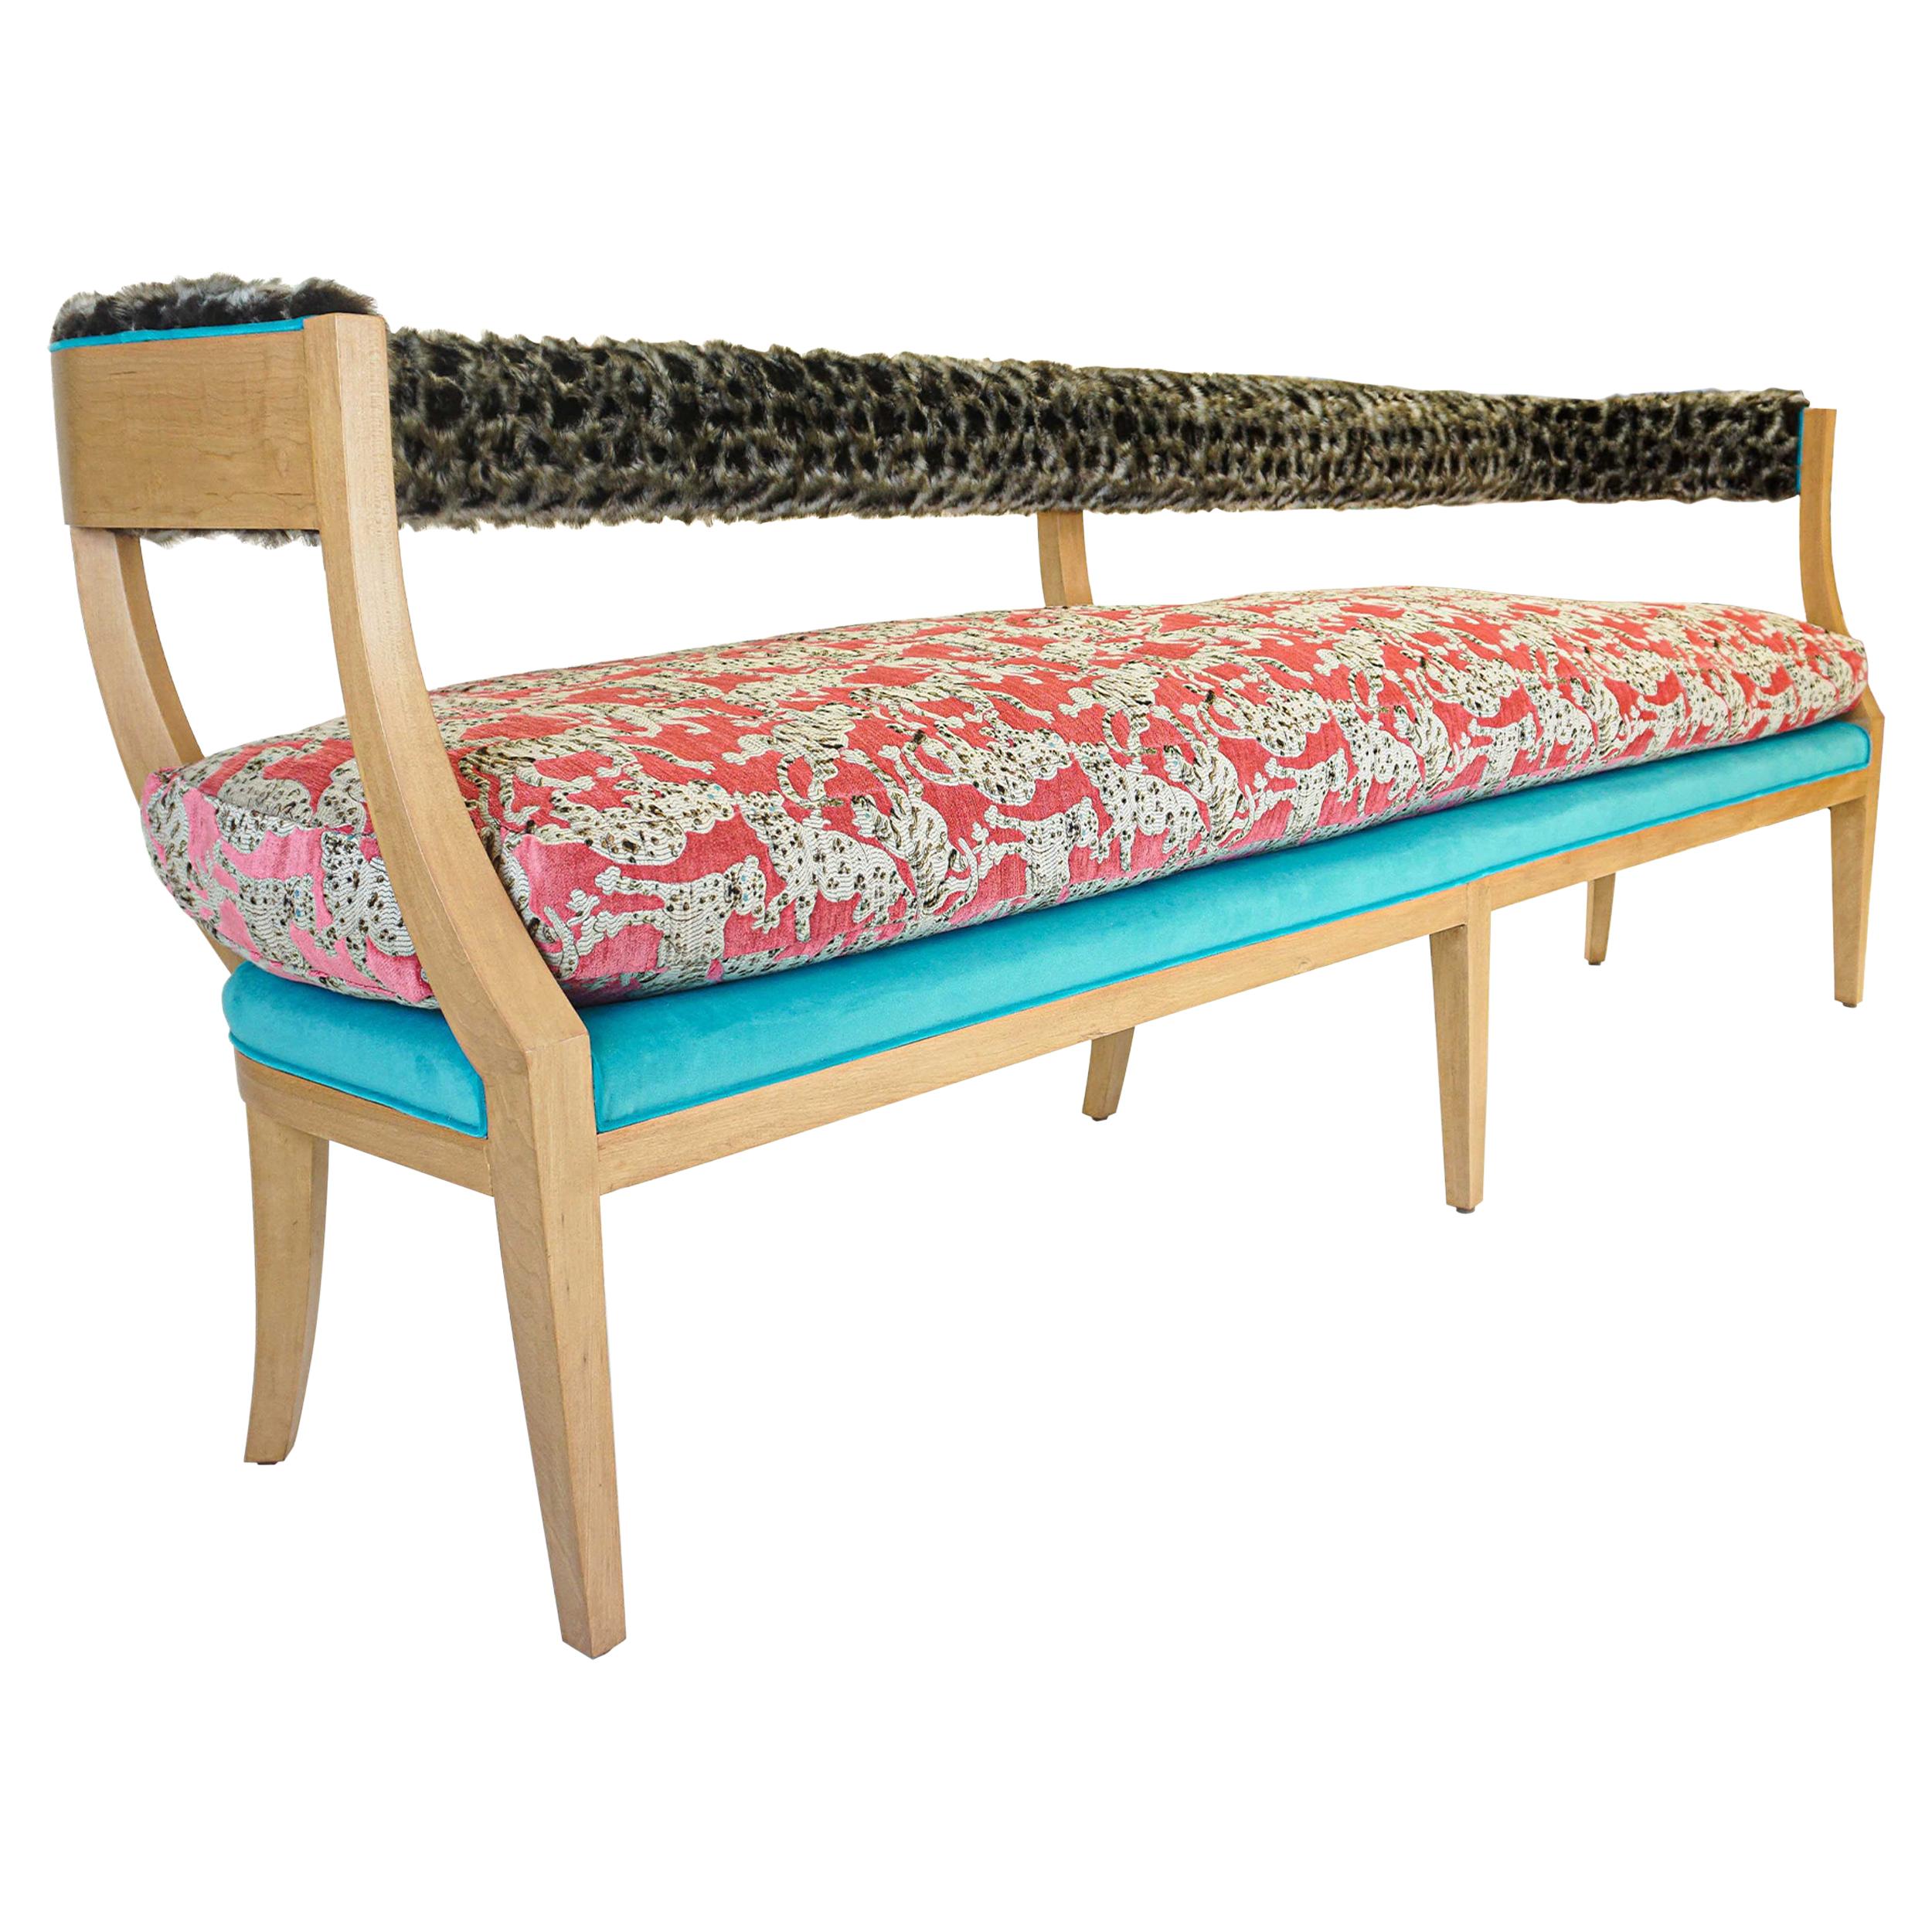 Japanese Inspired Bench with Wild Cat Print and Faux Fur